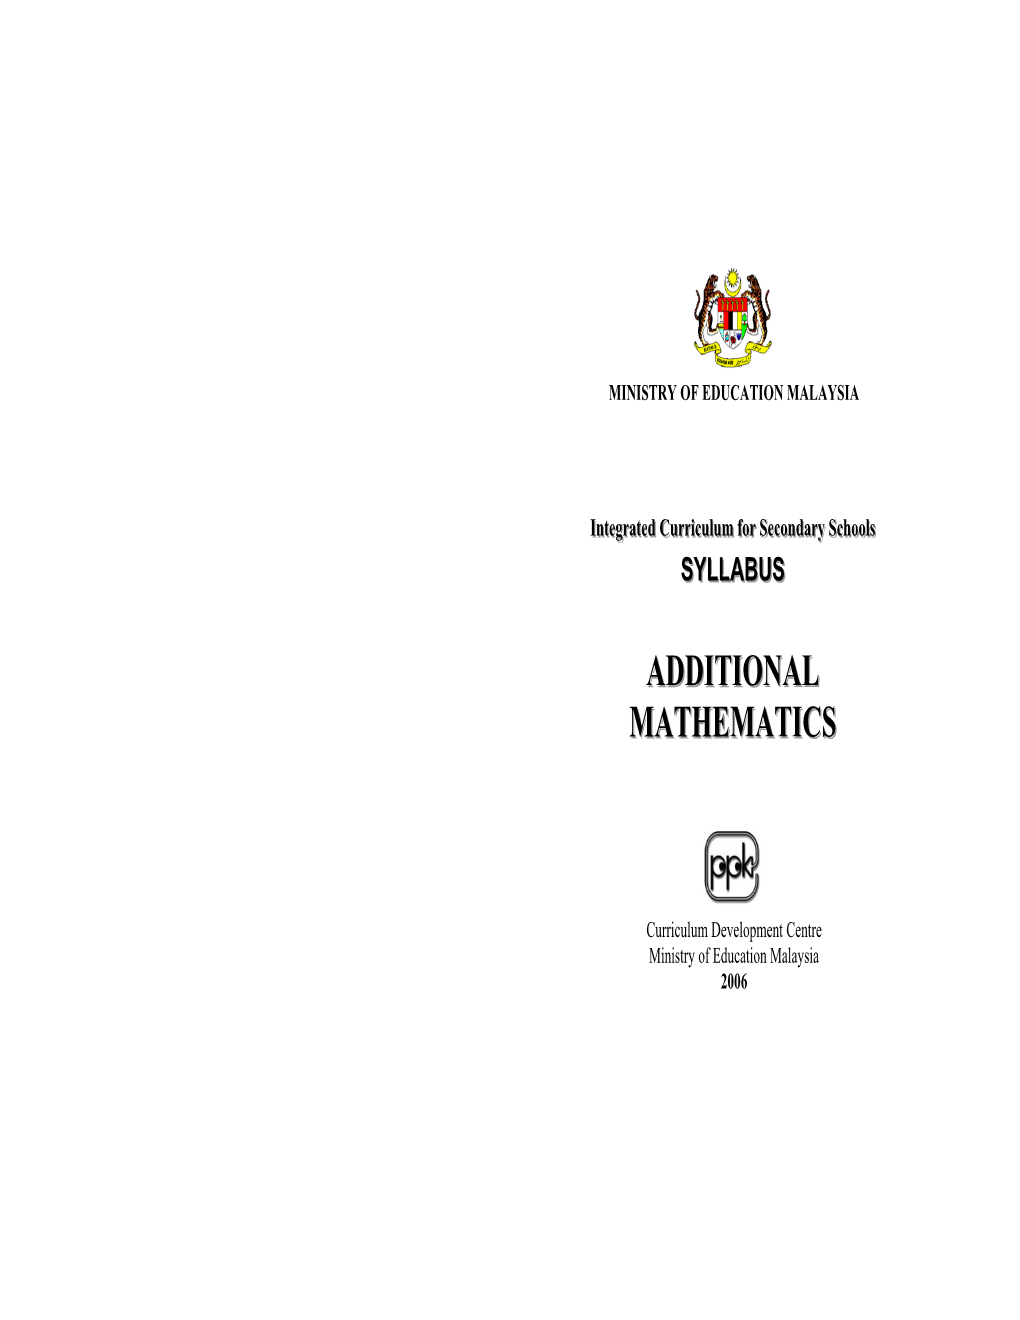 Additional Mathematics Syllabus Is the Work of Mathematics for Primary Schools, Mathematics and Additional Many Individuals and Experts in the Field